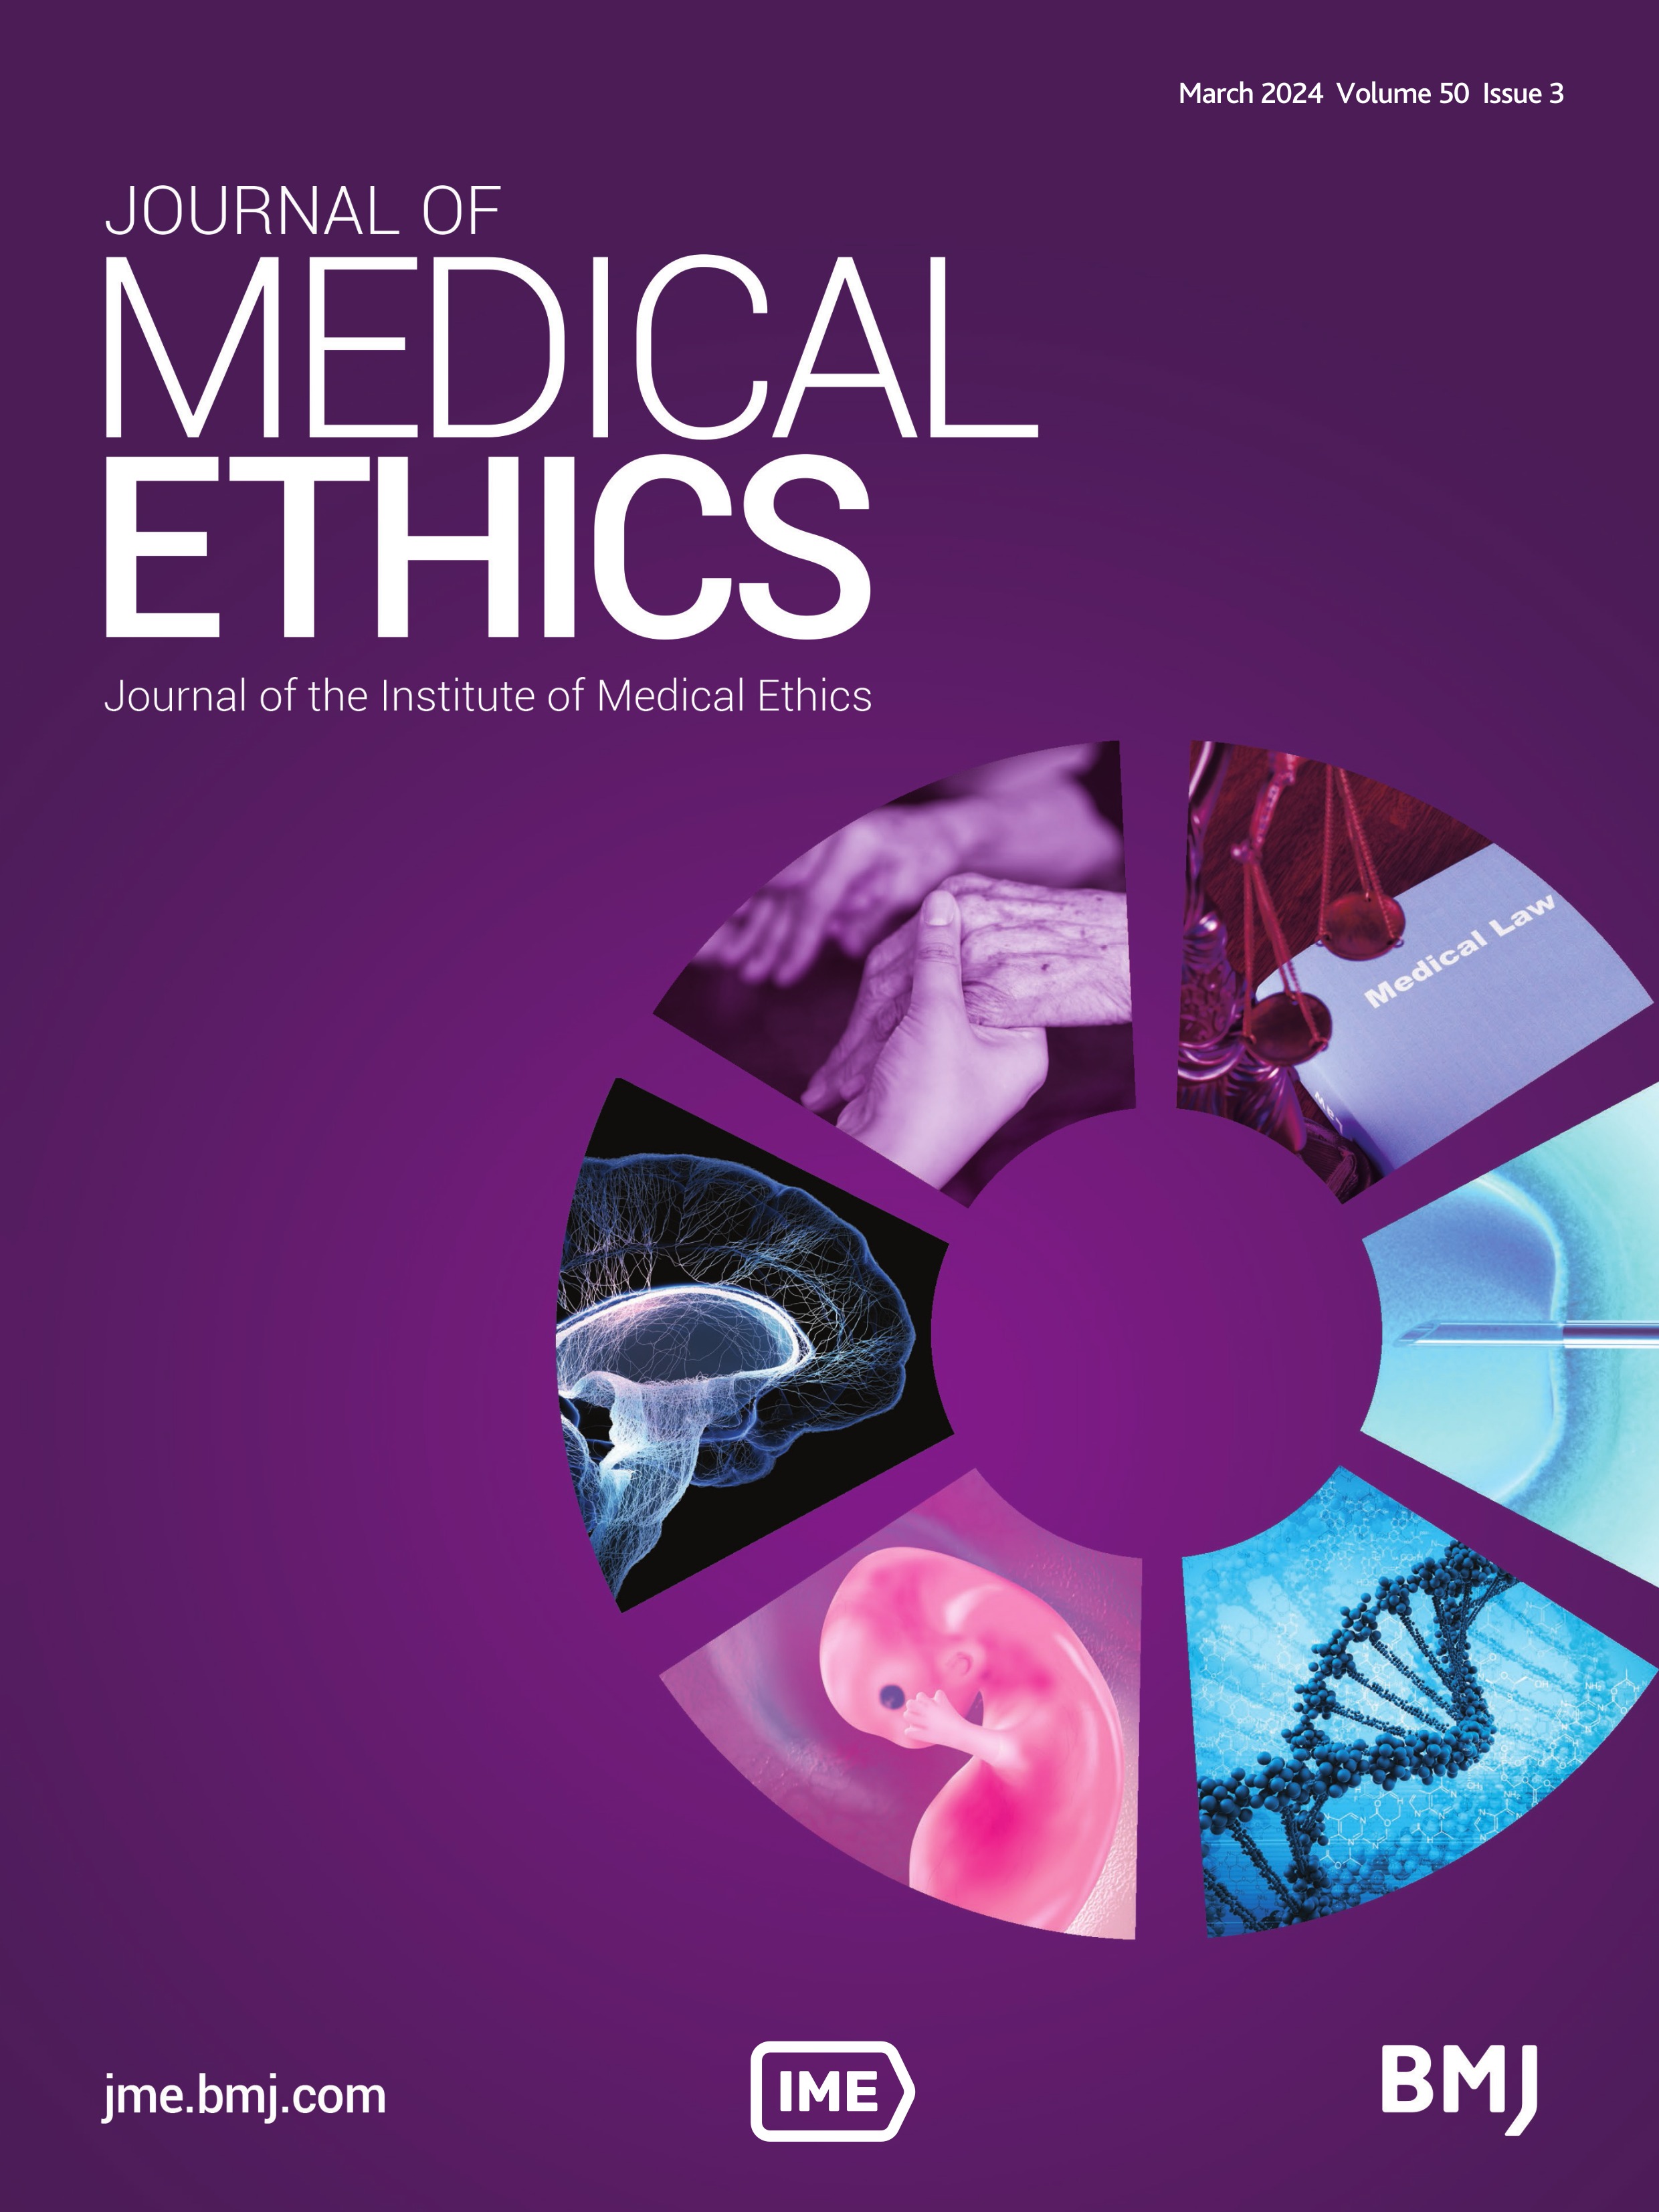 Can medical ethics truly be independent of law?